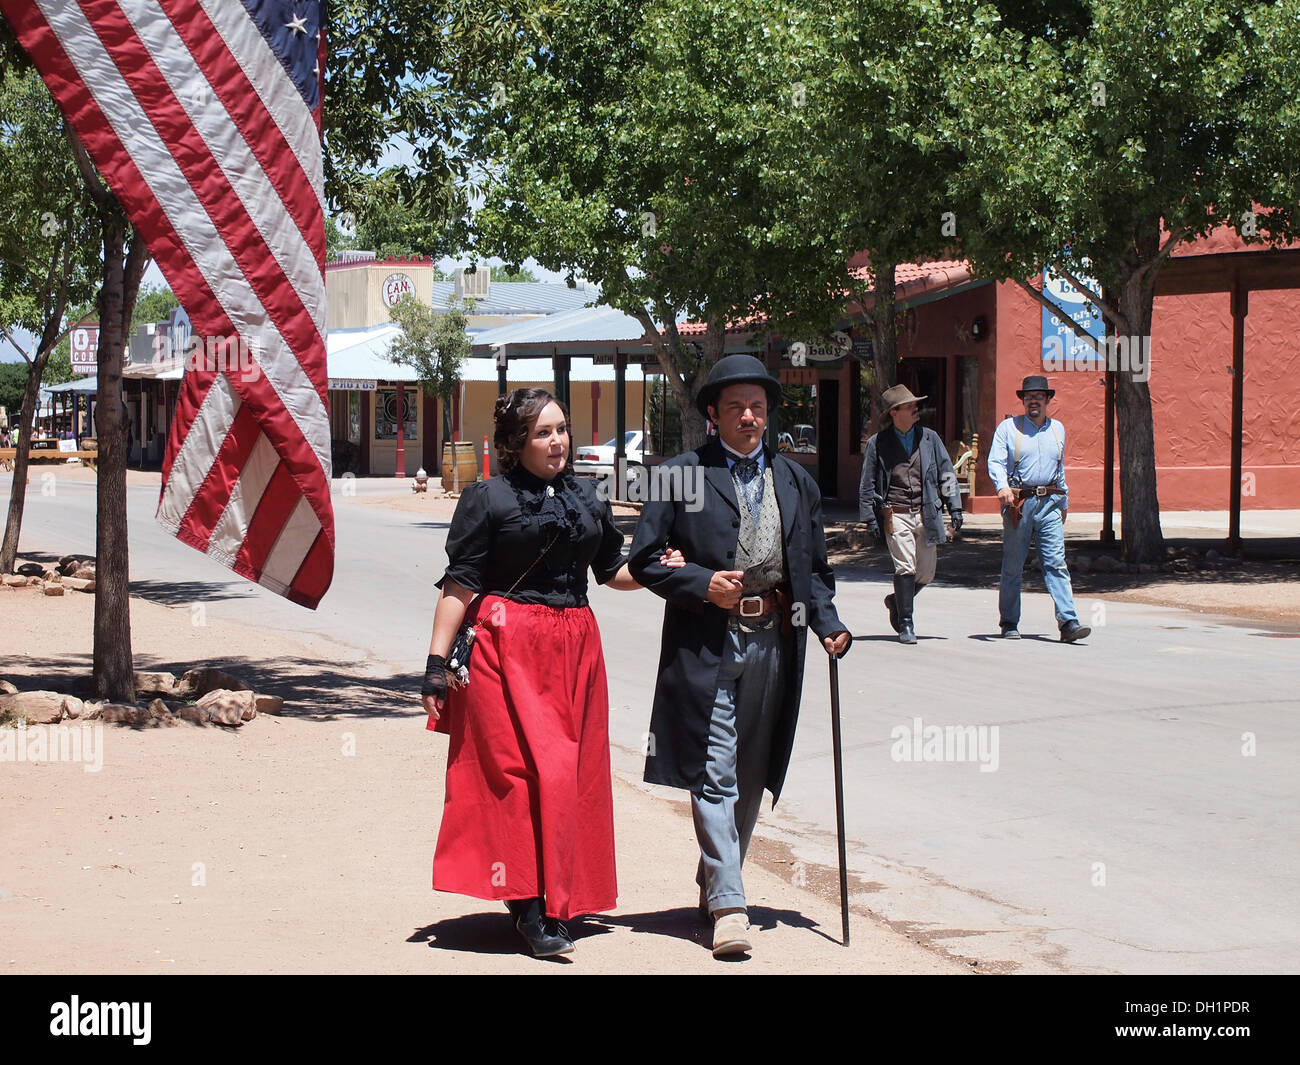 Actors portraying Big Nose Kate and Doc Holliday stroll through the historic American Old West town of Tombstone, Arizona, USA Stock Photo